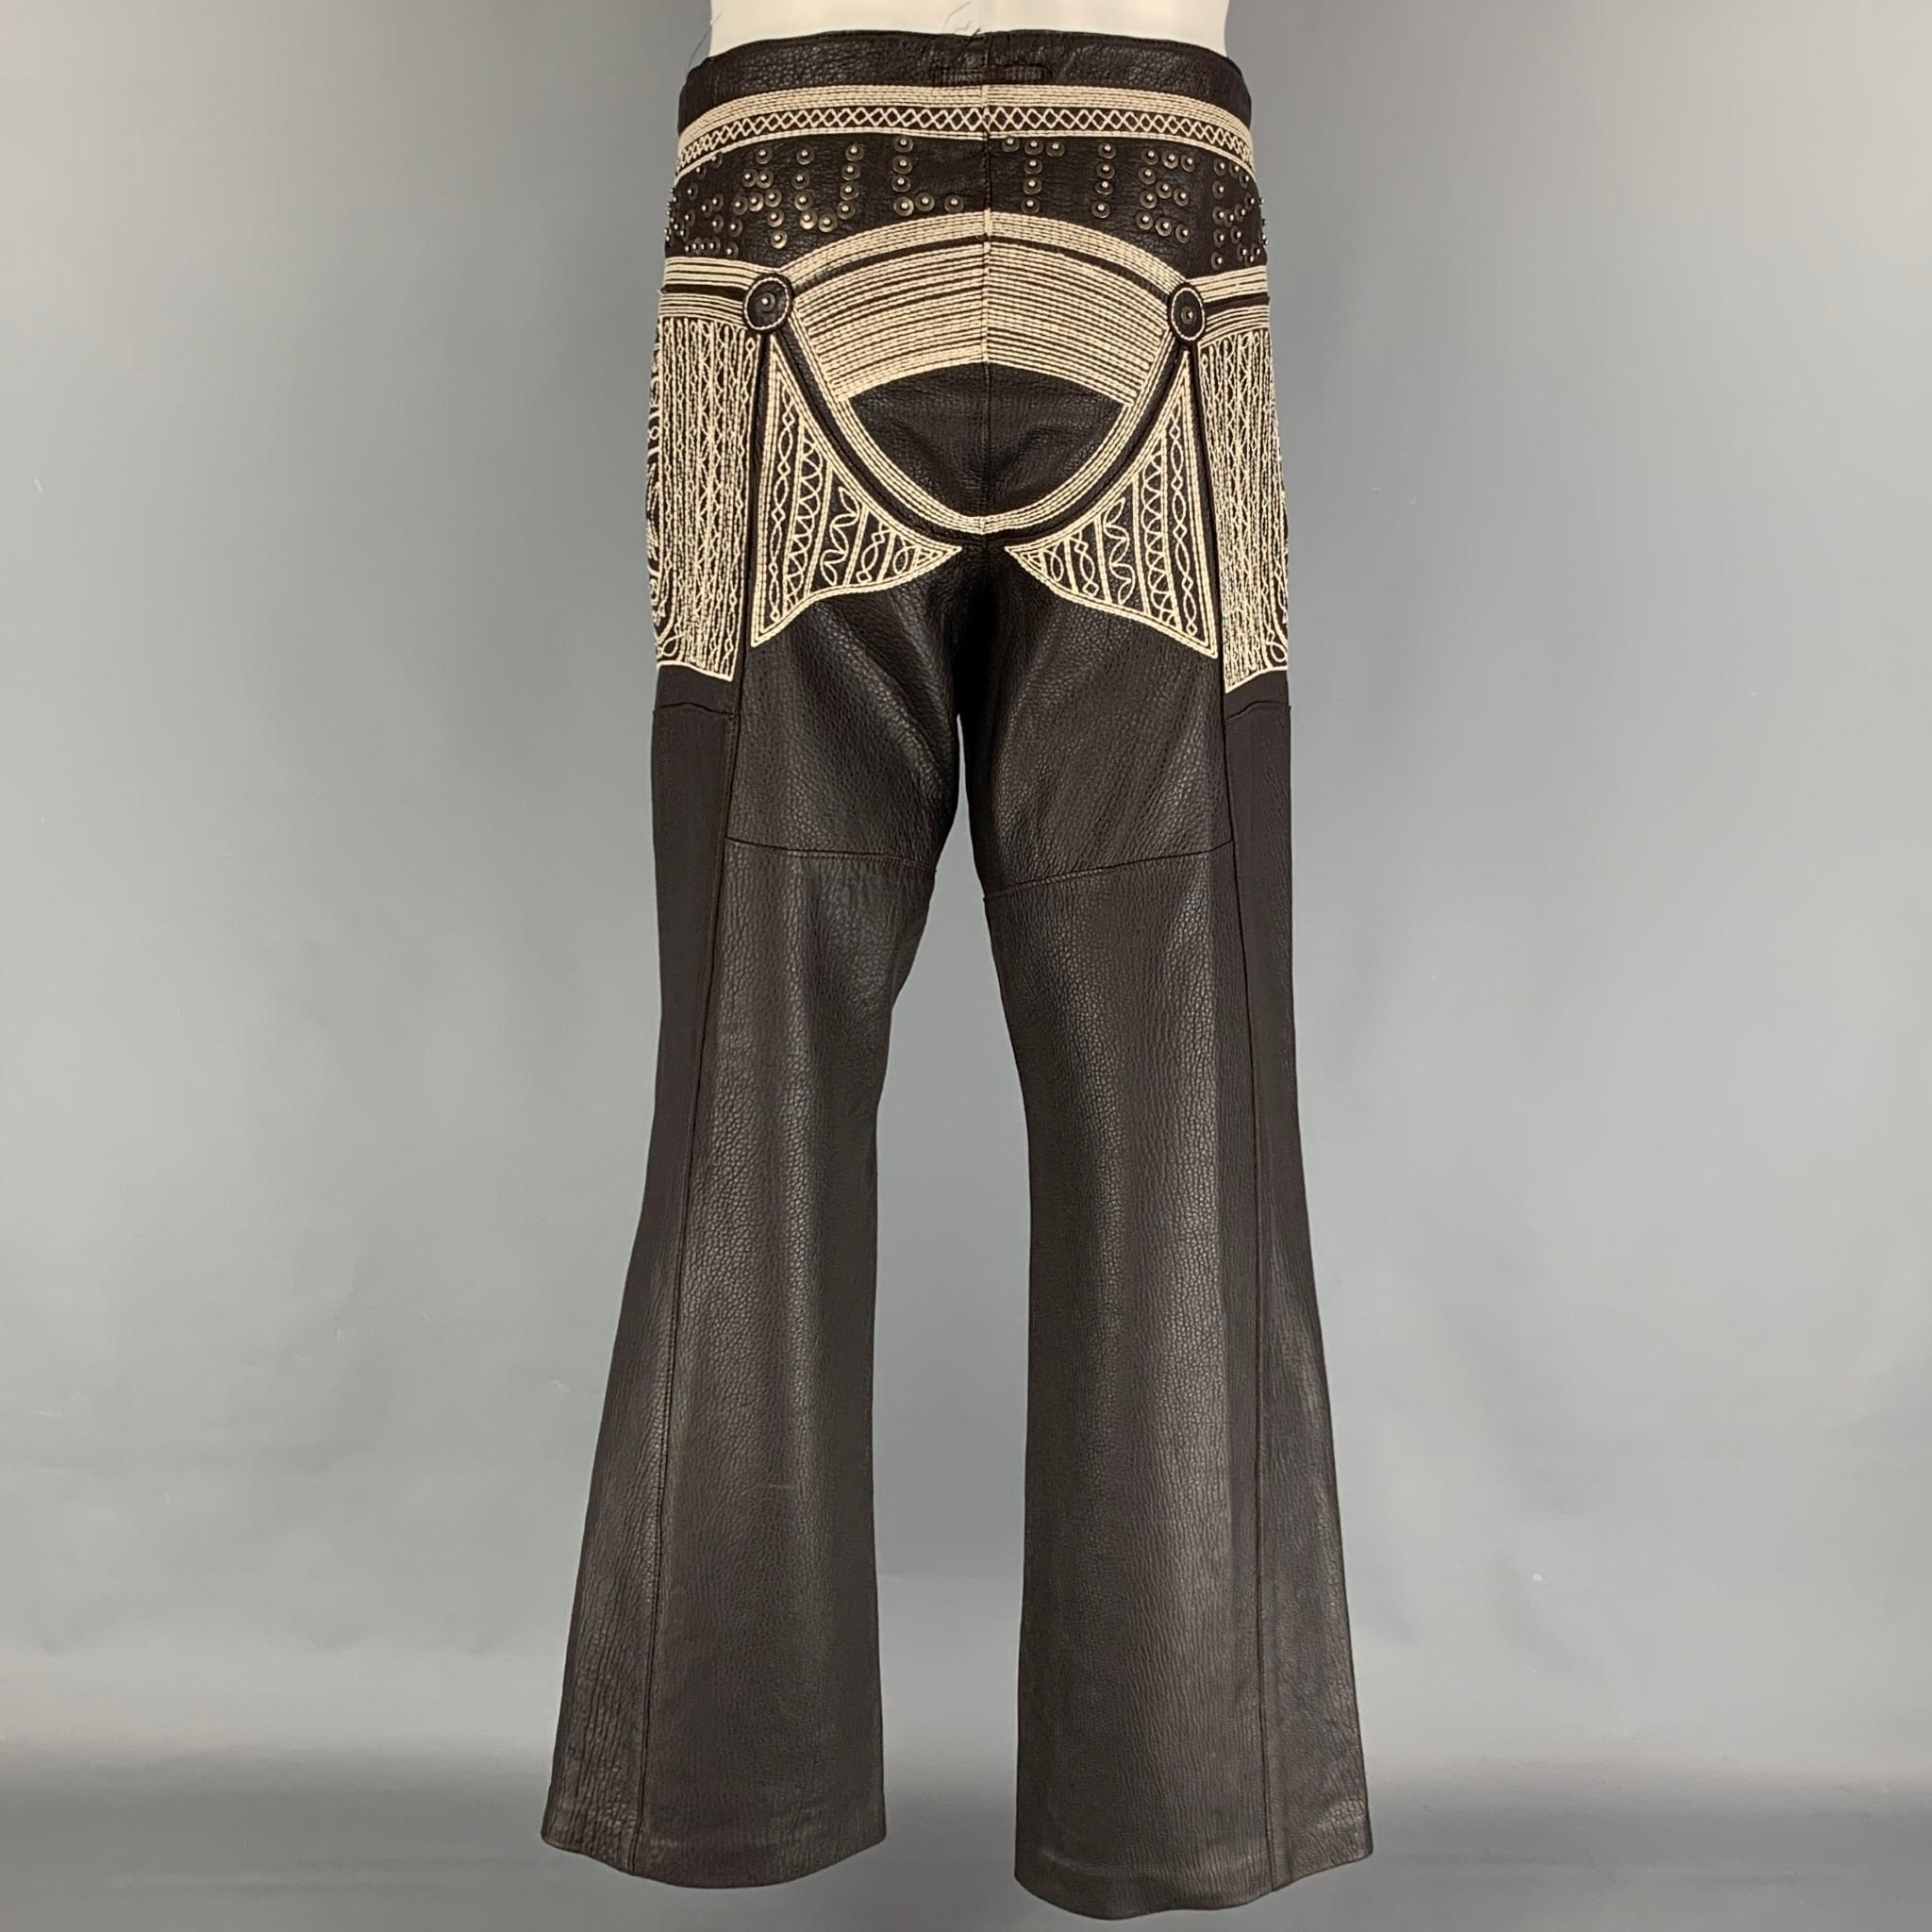 Black JEAN PAUL GAULTIER 2000 Size 34 Brown White Embroiderey Studed Leather Pants